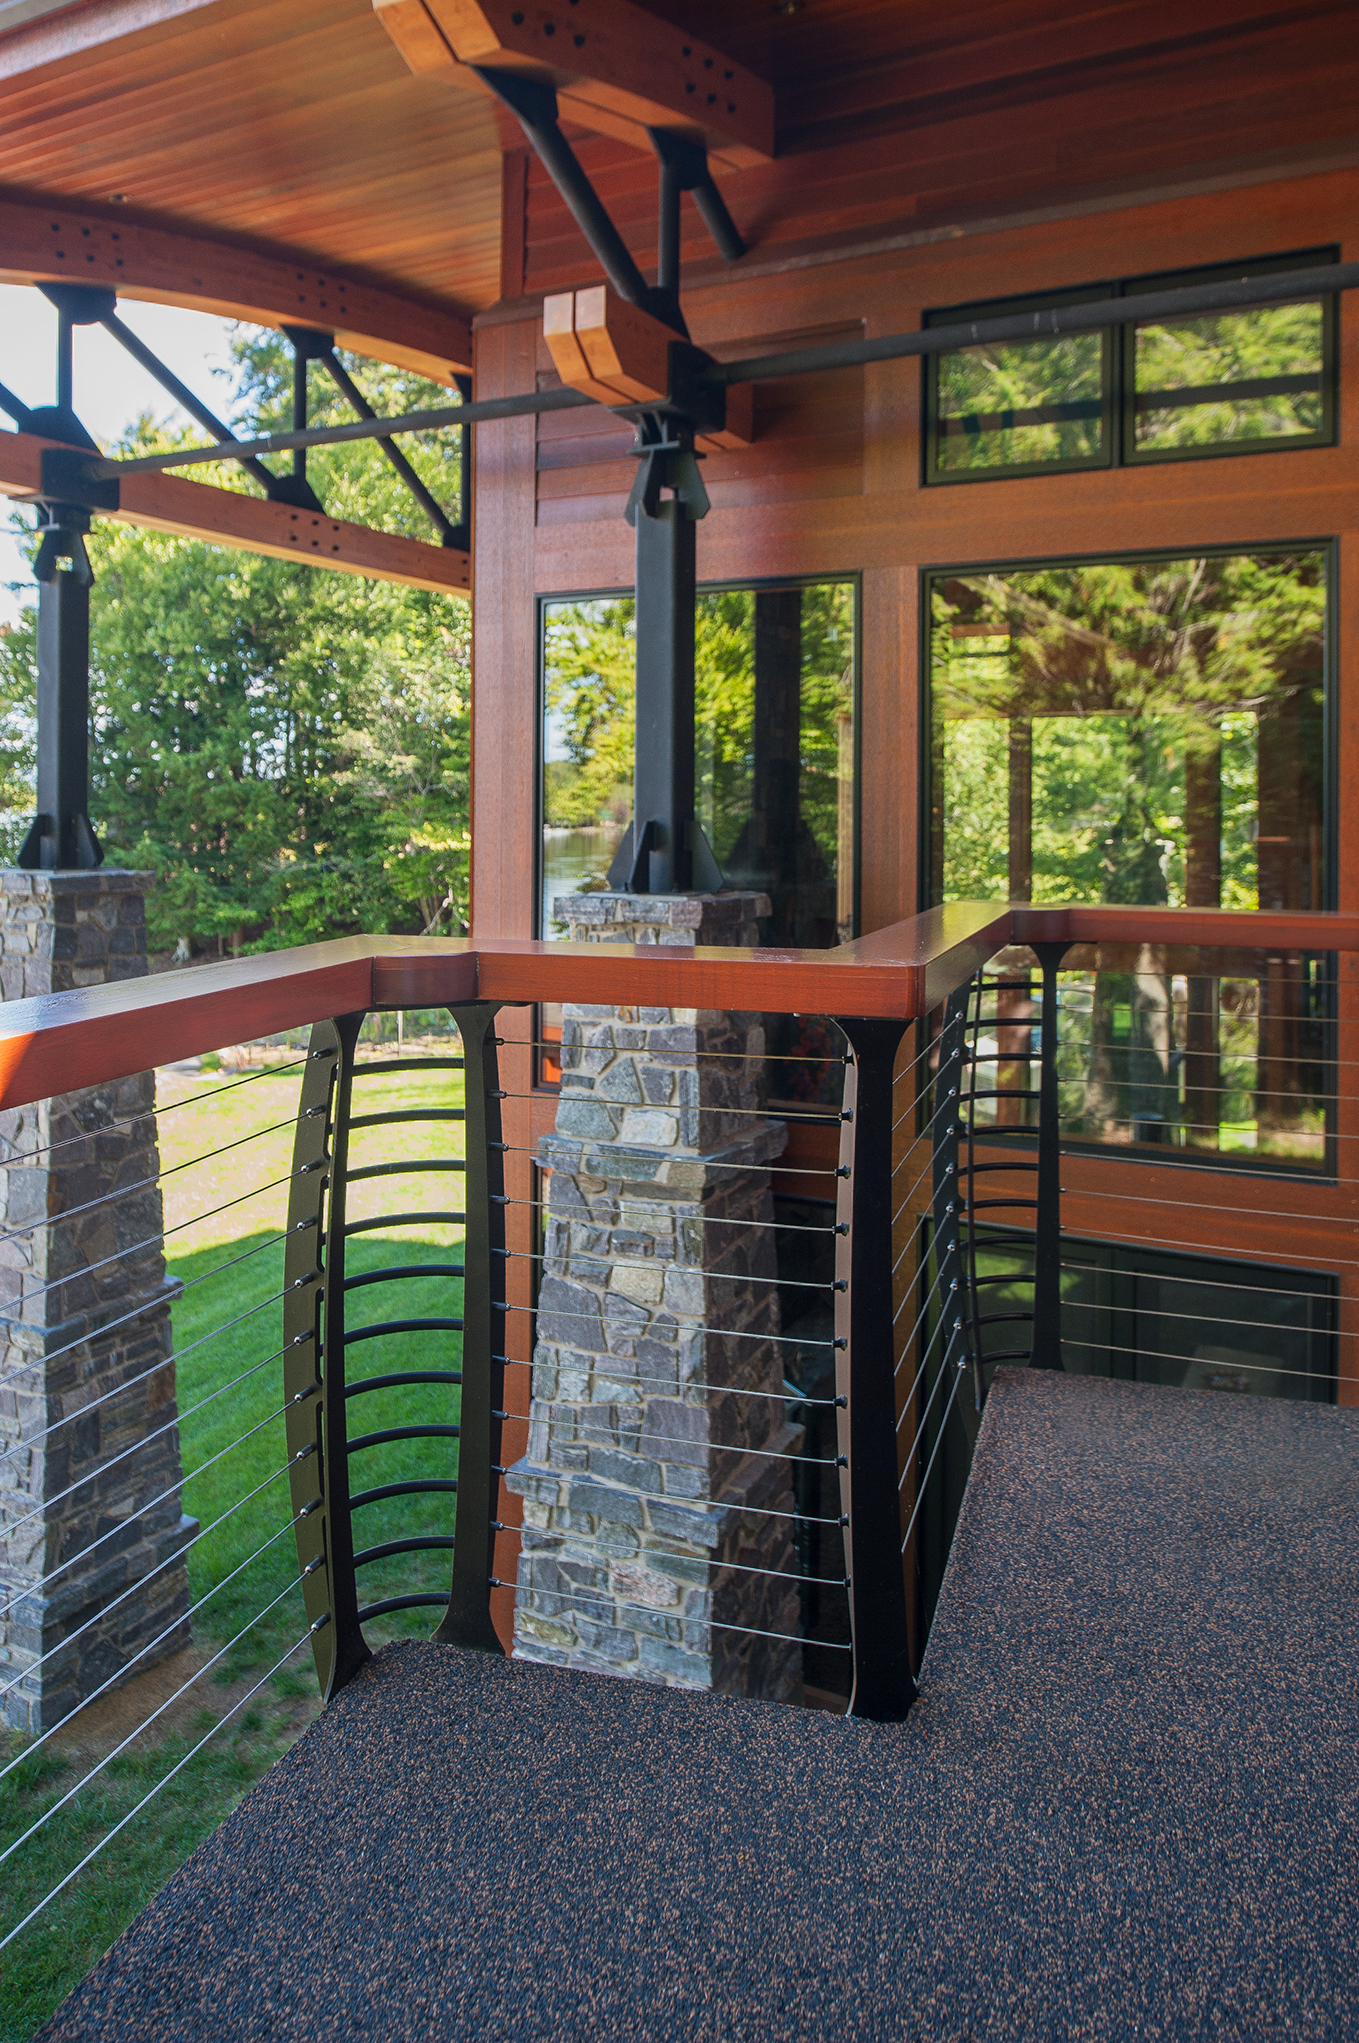 Exposed structural steel with wood and stone construction